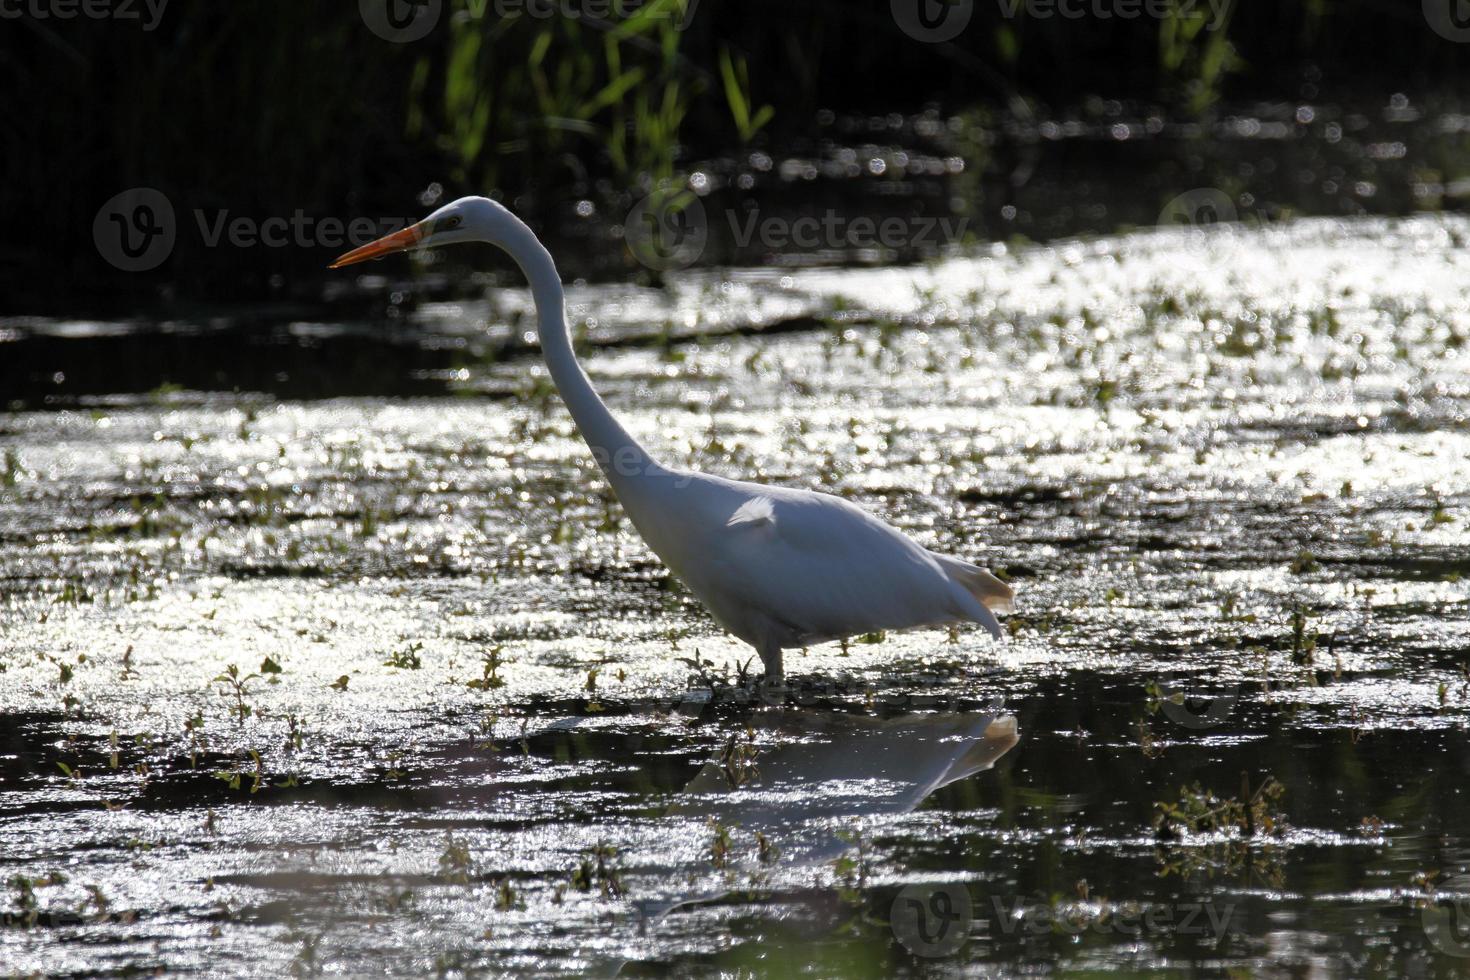 A view of a Great White Egret photo